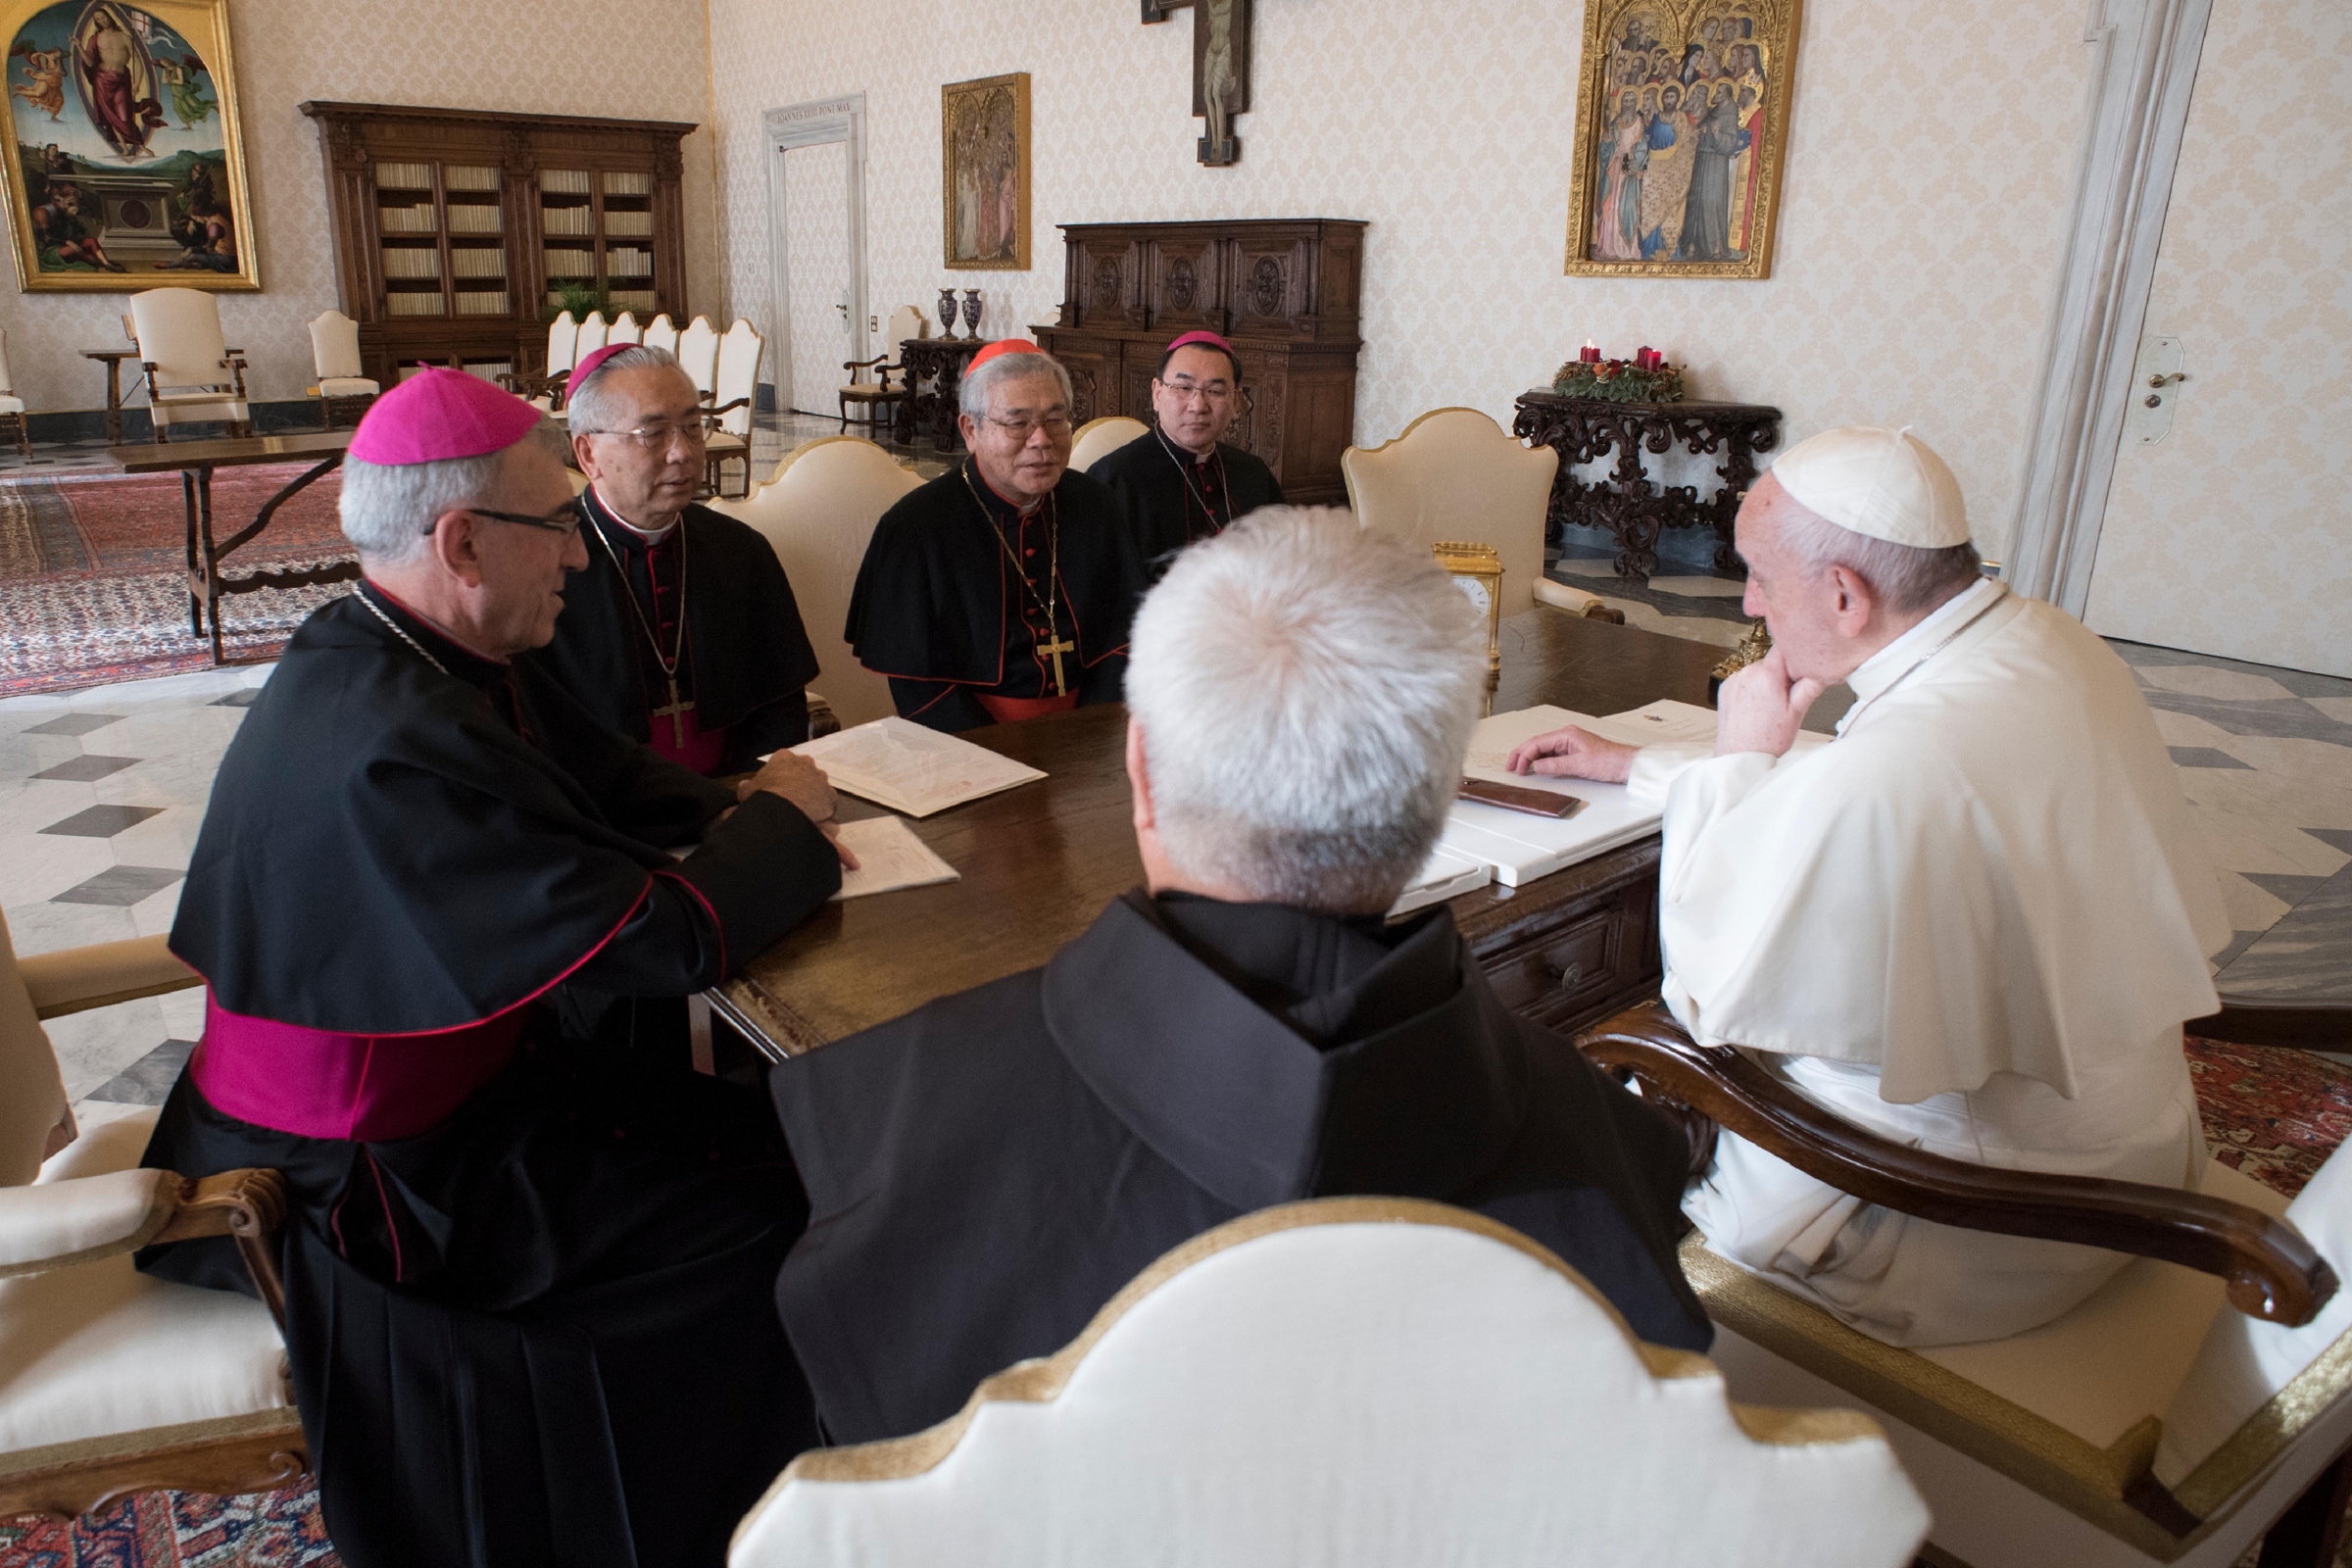 Pope Francis met with leaders of the Japanese bishops' conference Dec. 17, 2018, in the papal library of the apostolic palace. From left to right are: Auxiliary Bishop Josep Abella Batlle of Osaka; Archbishop Joseph Mitsuaki Takami of Nagasaki, bishops' c